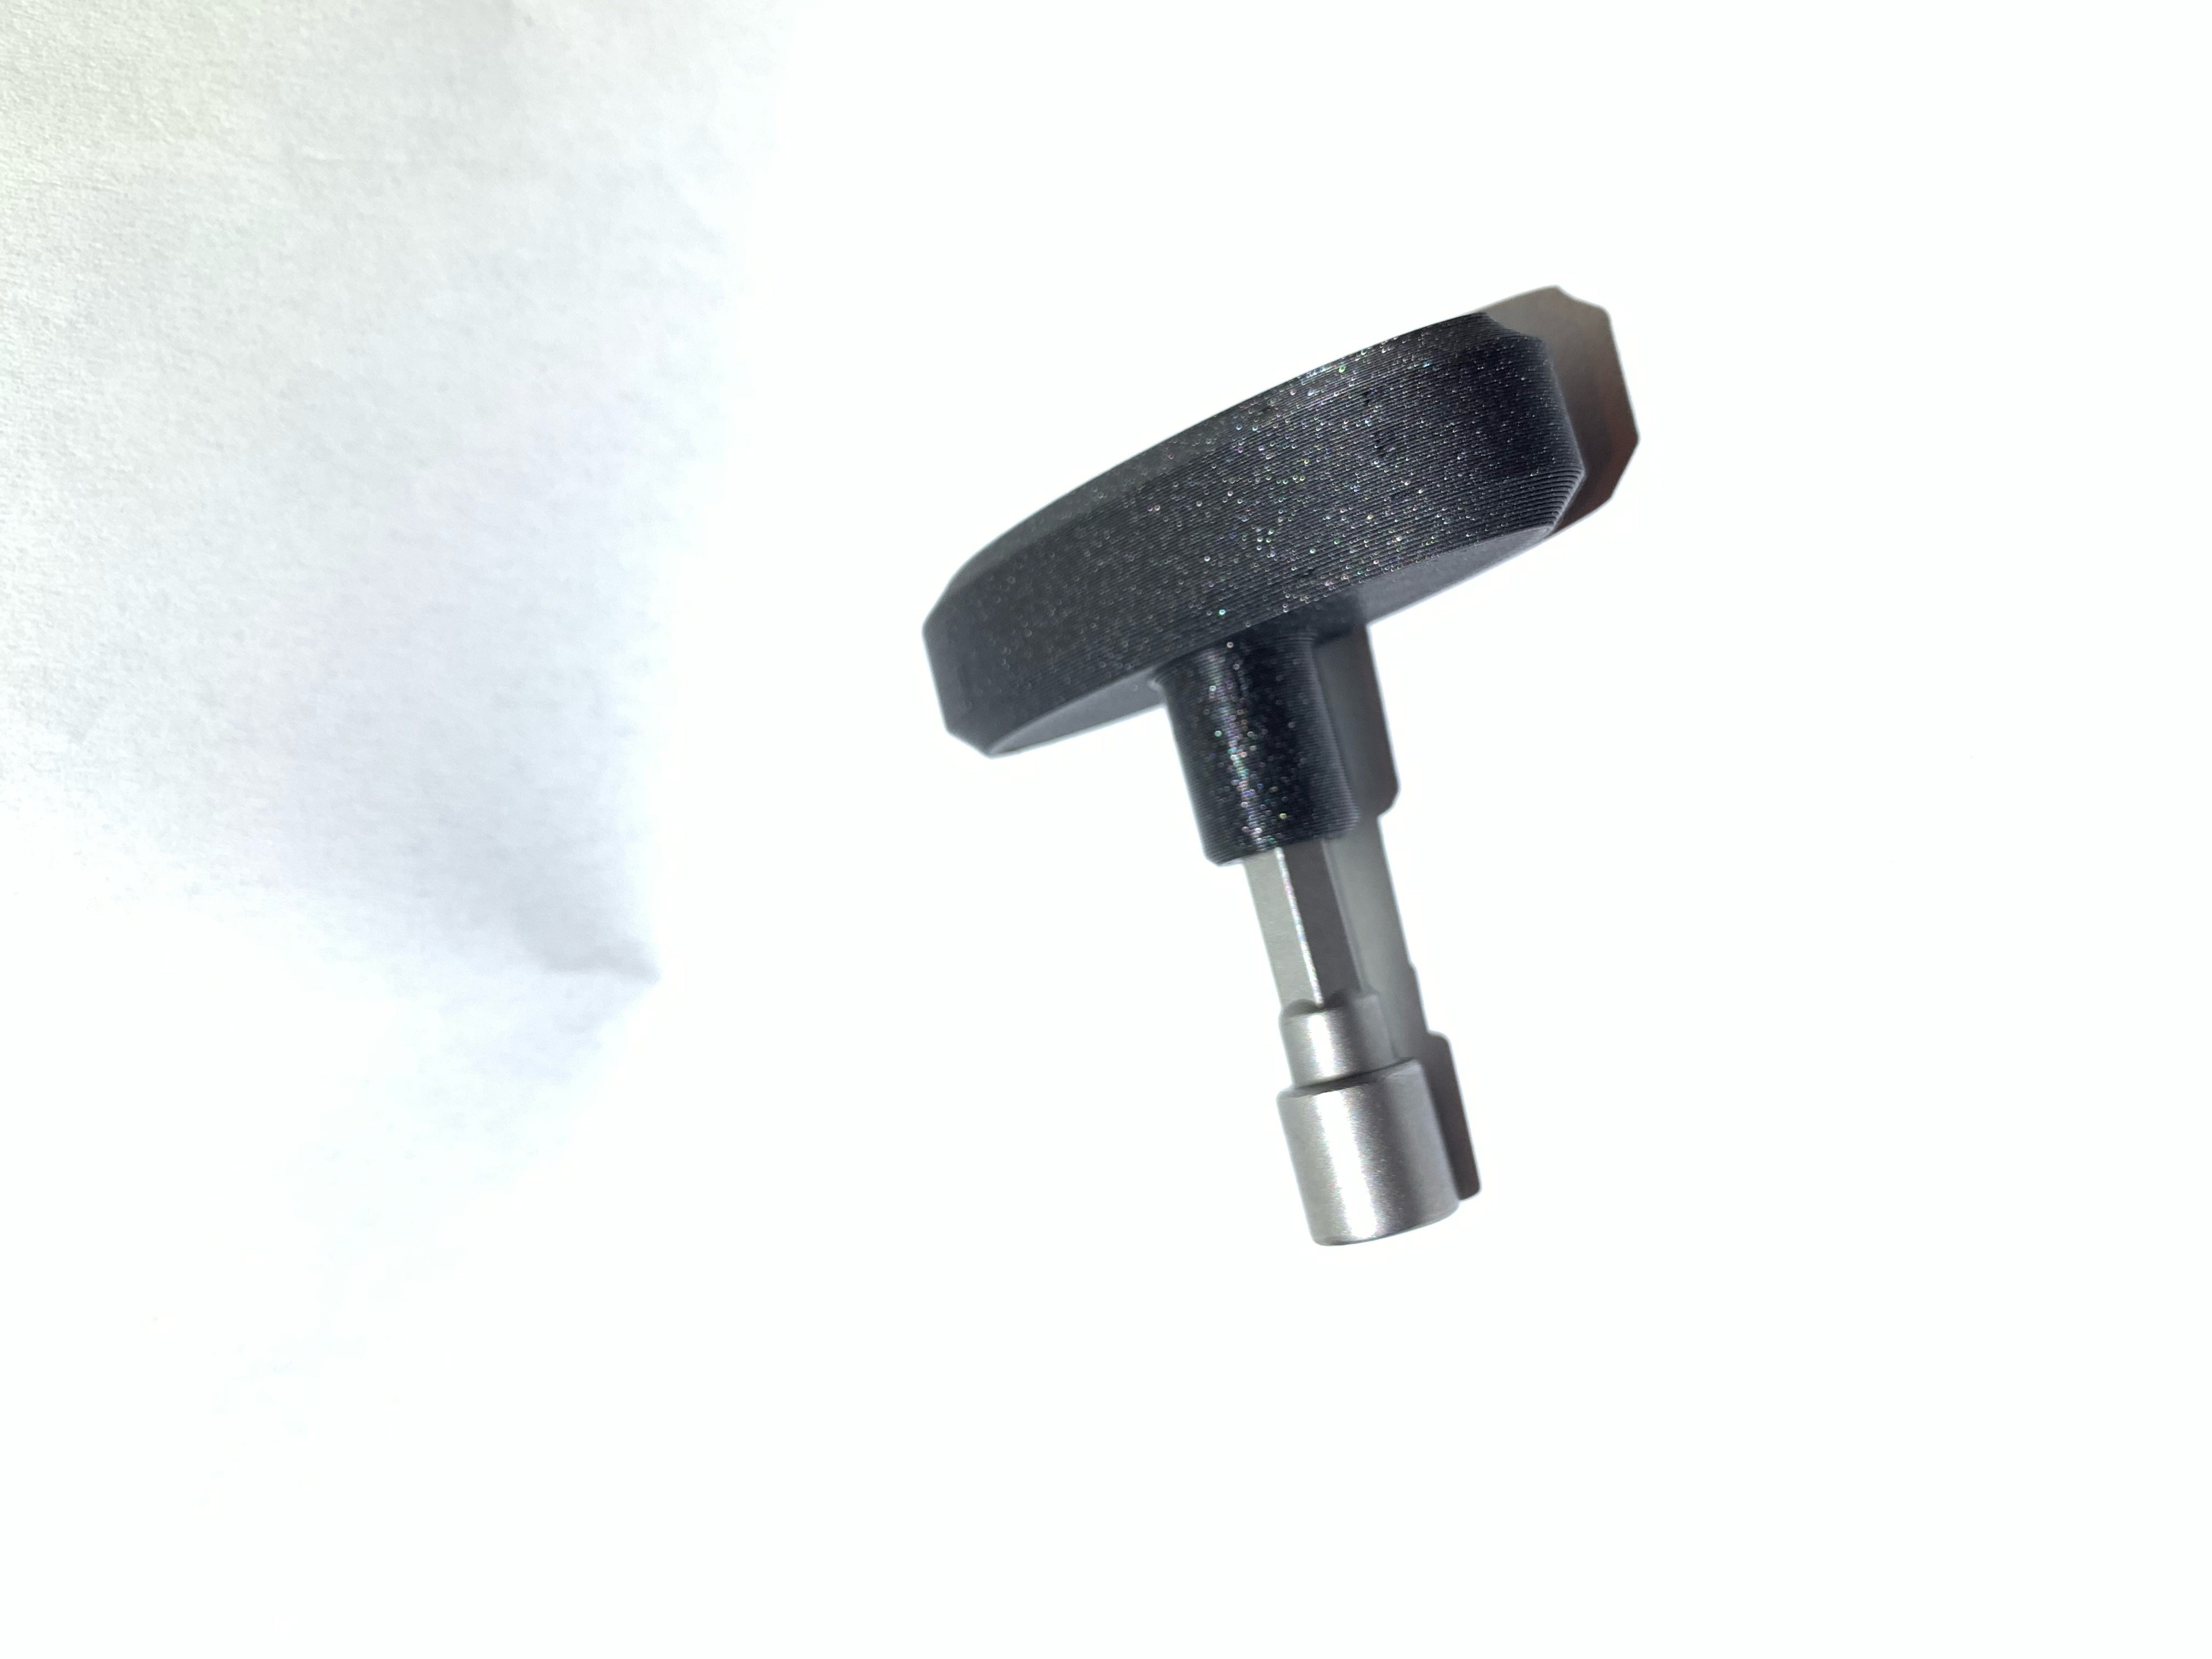 NOZZLE WRENCH